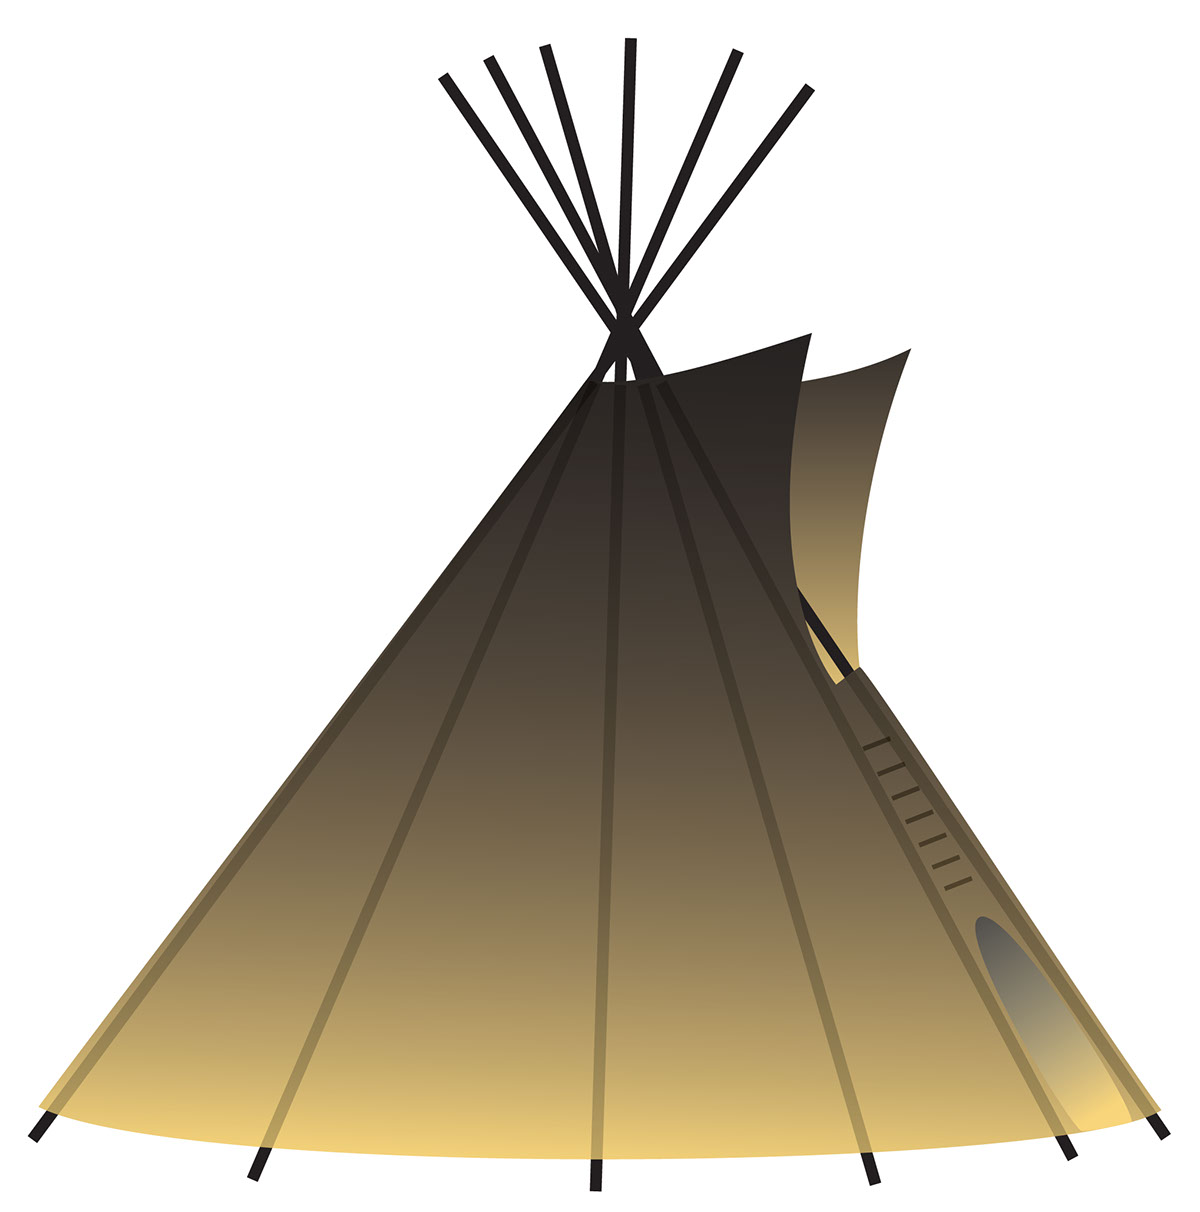 American Indian Tipi art rendition image